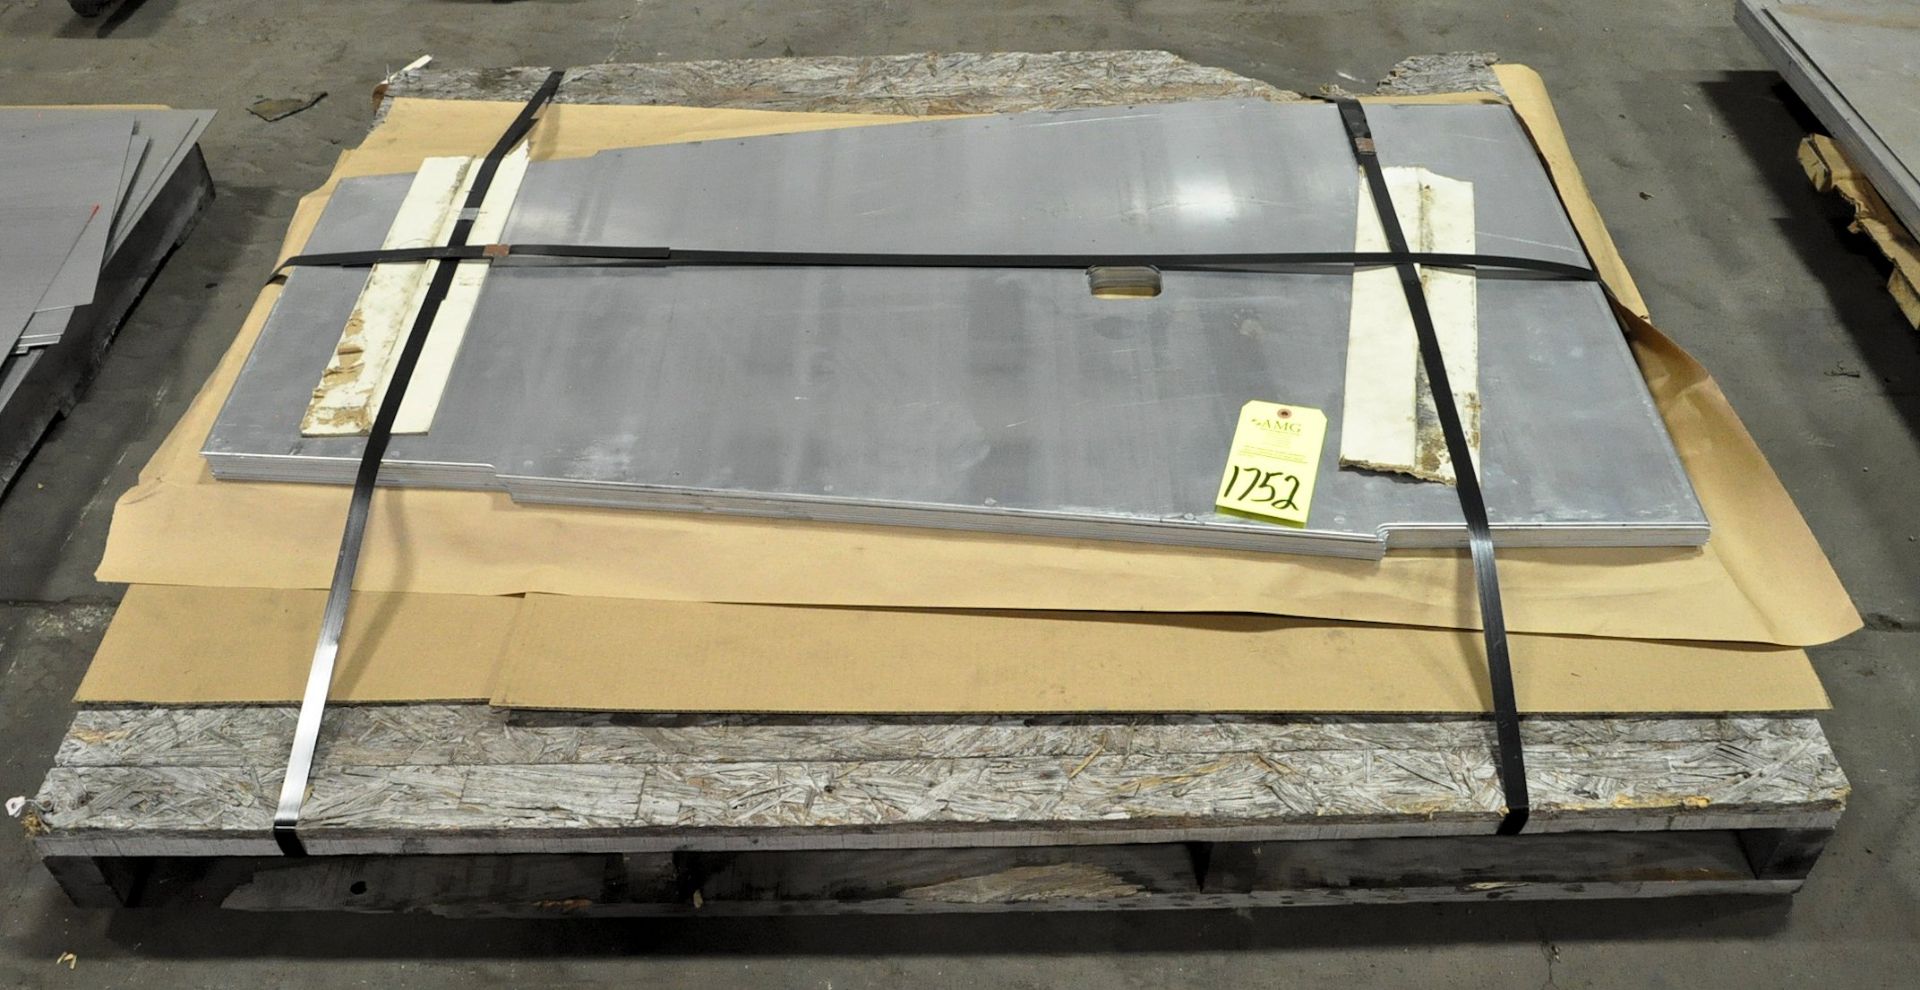 Lot-Misc. Sheet Metal Stock Cutoffs on (1) Pallet, (Warehouse Room), (Yellow Tag)